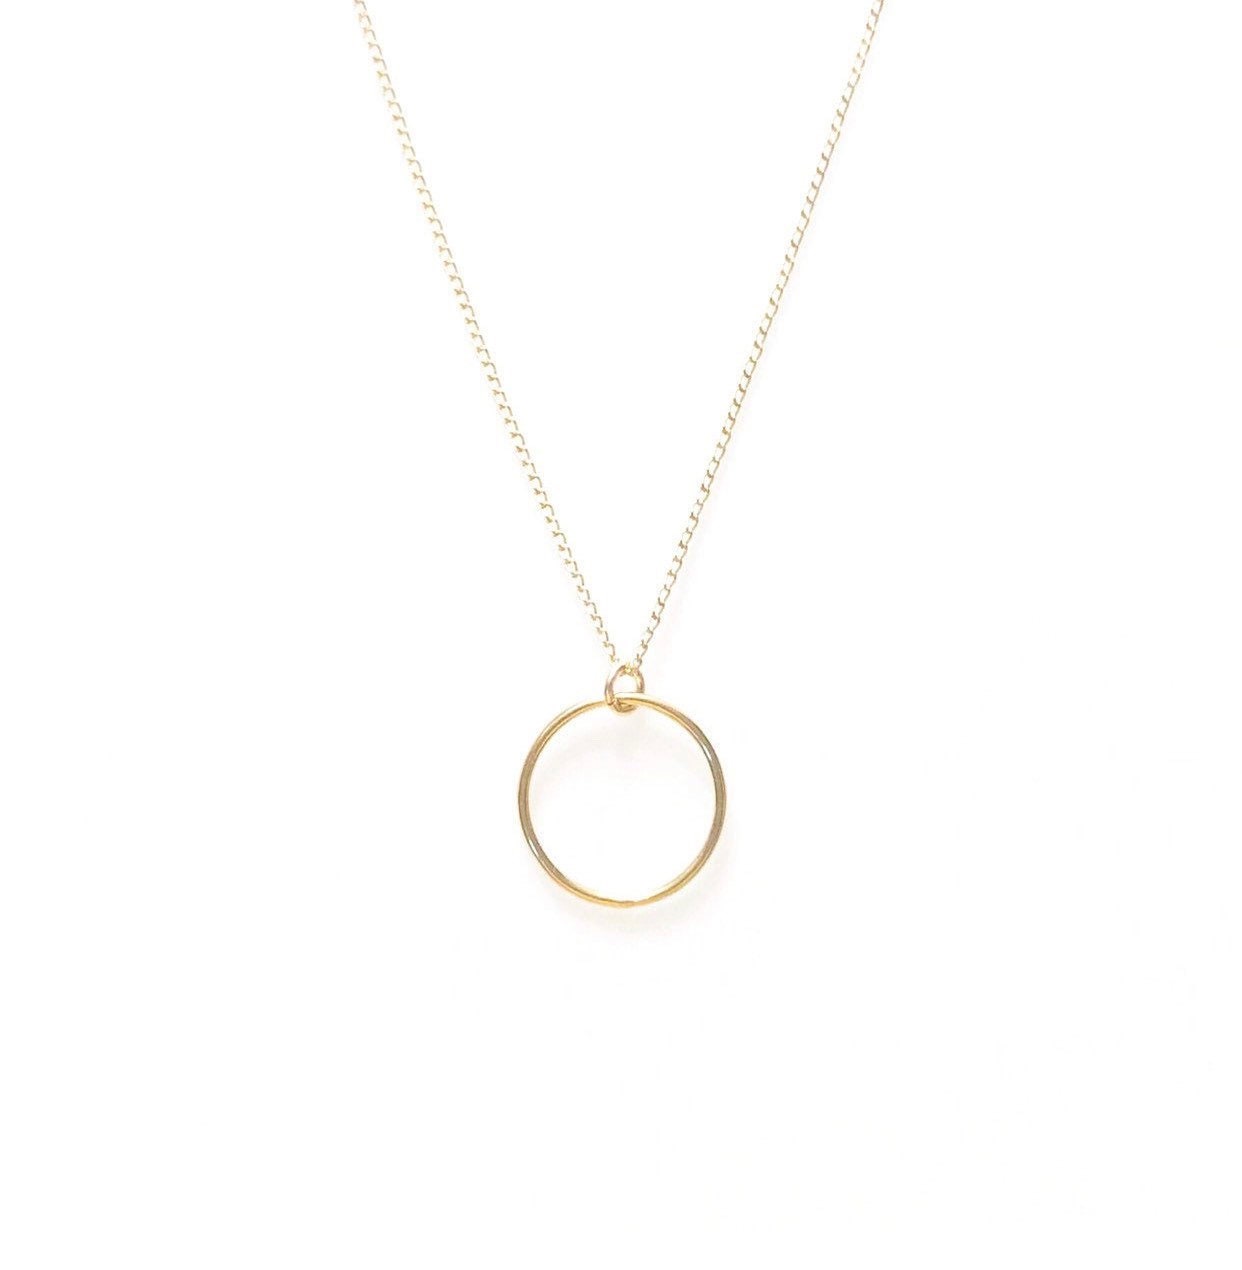 Perfect circle necklace (14K gold-filled or sterling silver)